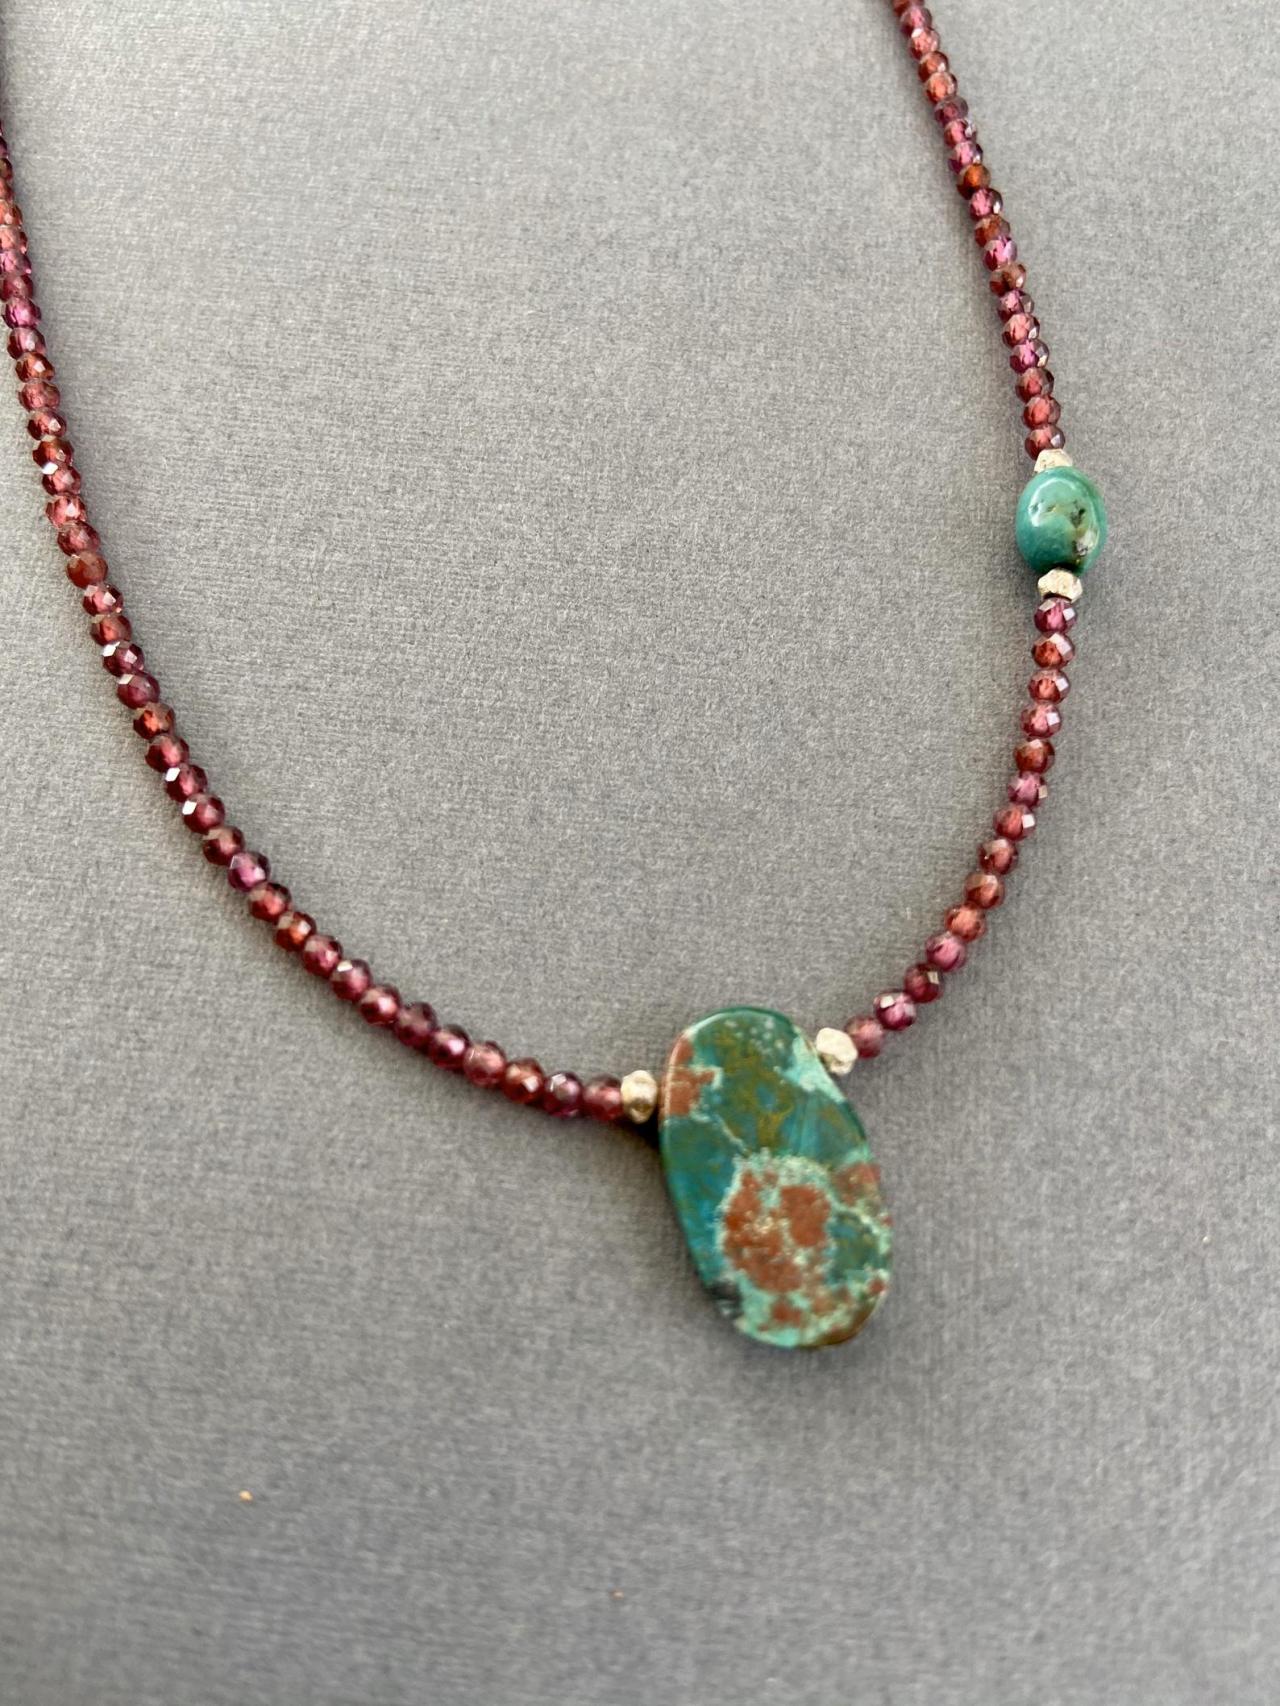 Petite Micro Faceted Garnet Arizona Chrysocolla Turquoise Sterling Necklace Adjustable